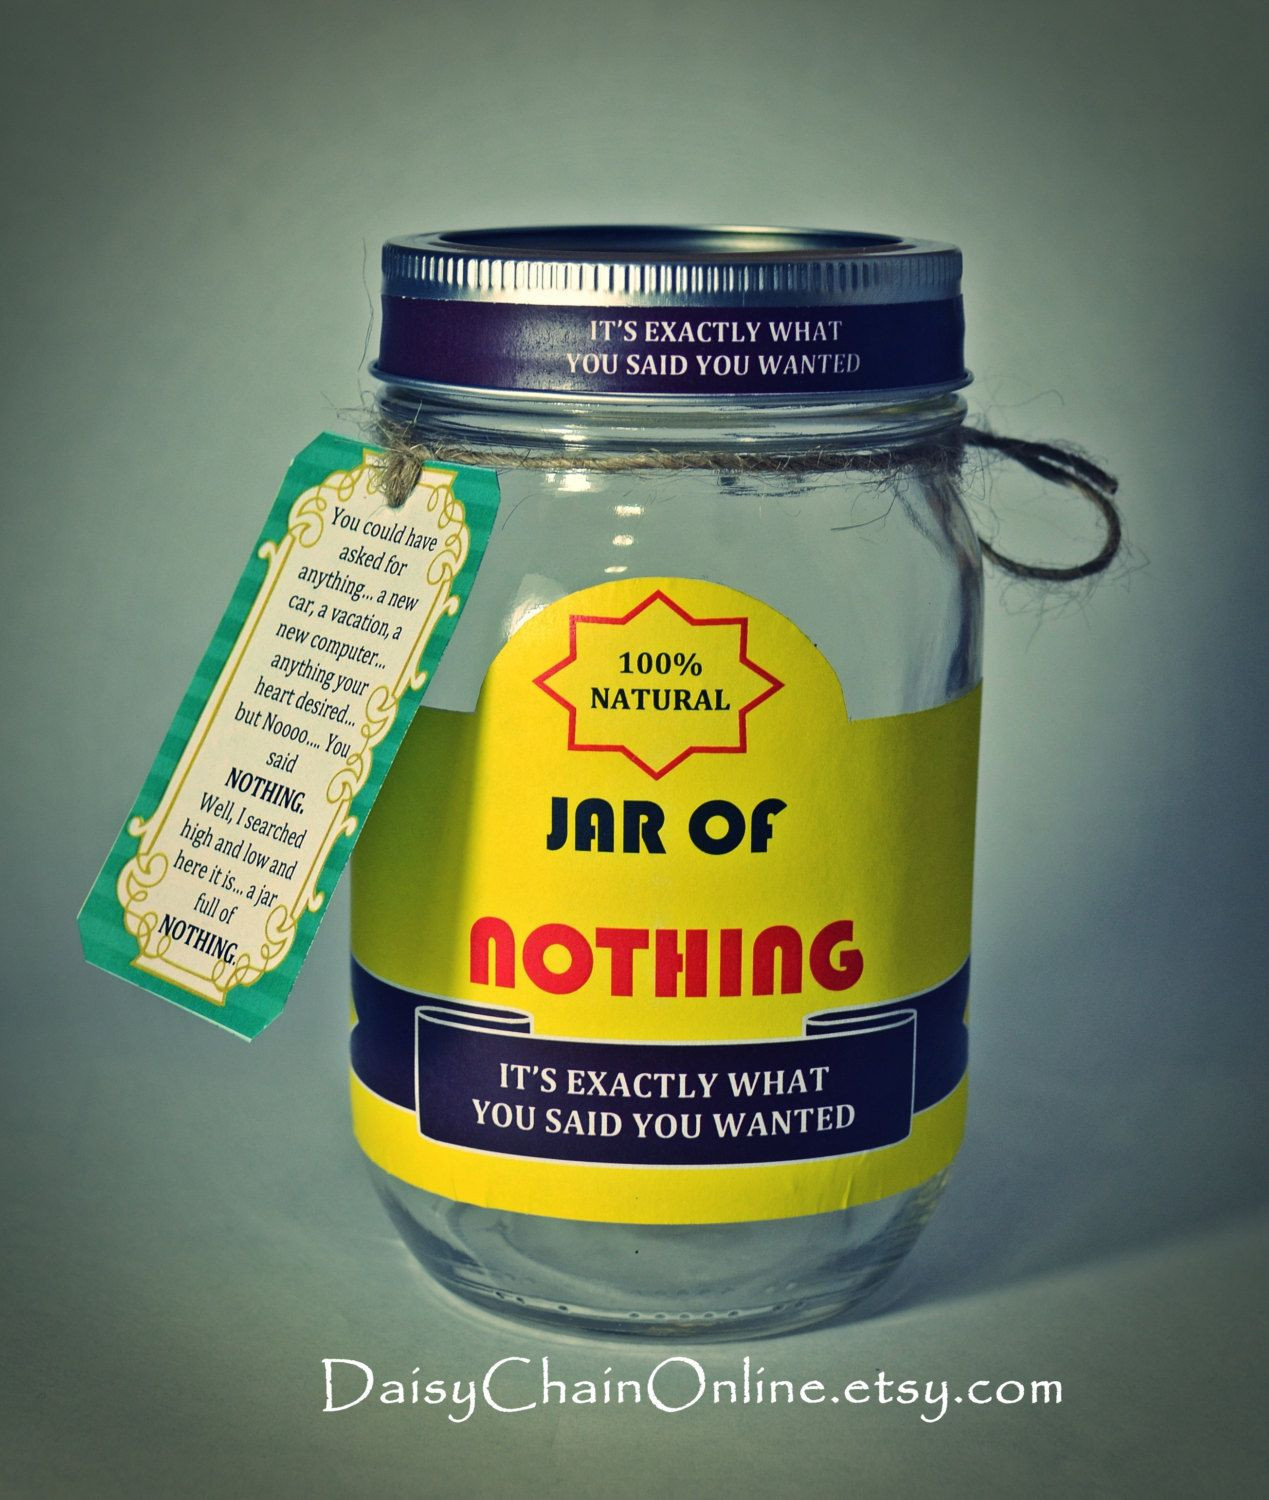 Birthday Gift For Guy Friend
 Printable Labels for DIY Jar of Nothing DIY Gag by